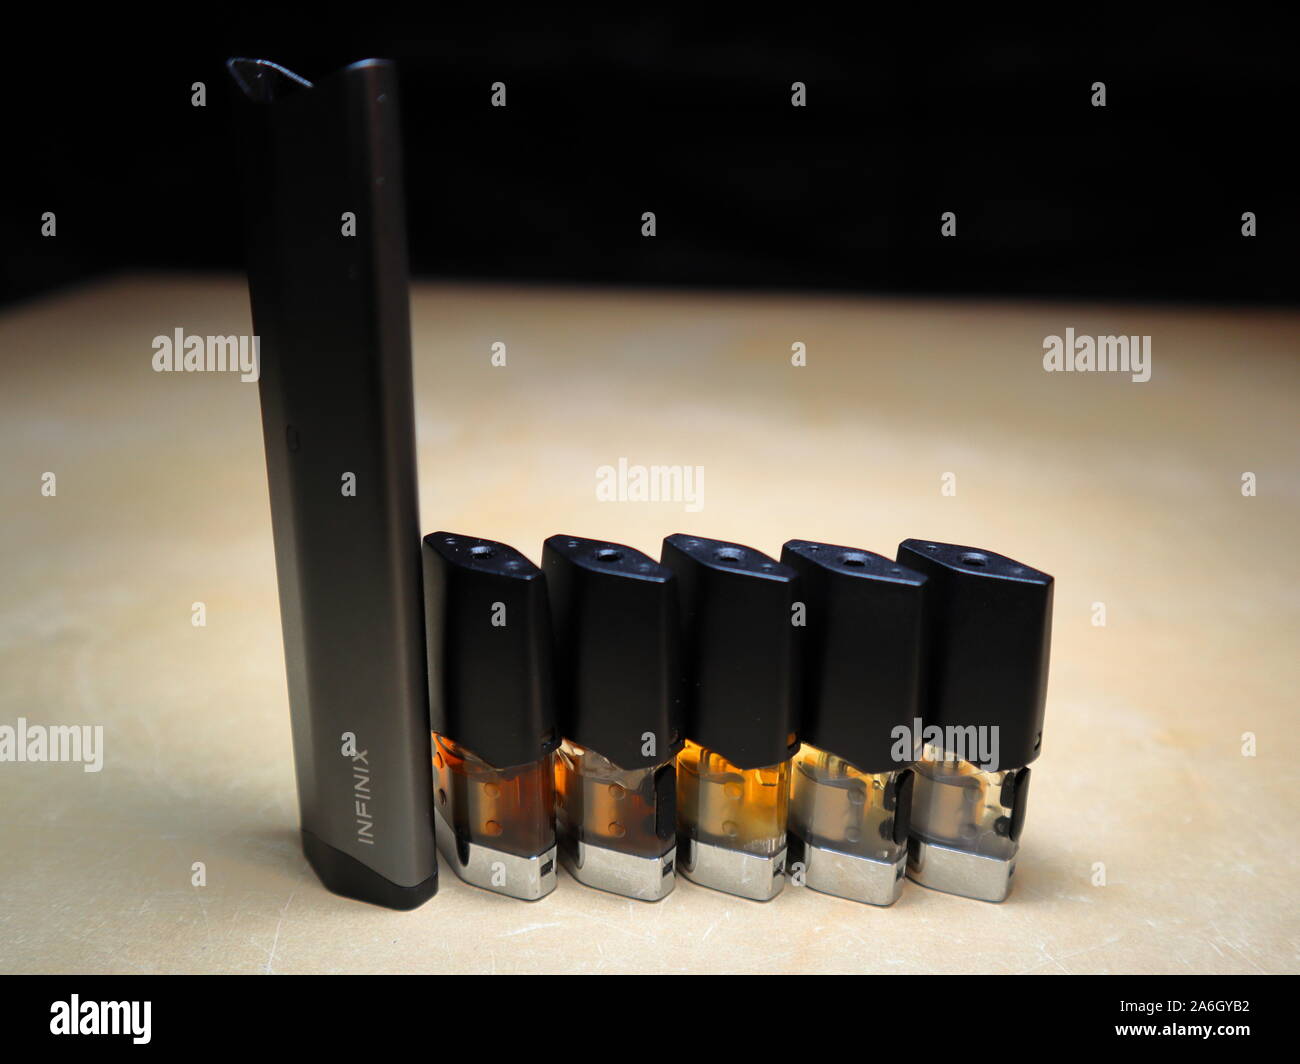 Smok Infinix refillable pod vape pen electronic cigarette with pods filled with e-juices of different shades of orange arranged in a gradient, isolate Stock Photo